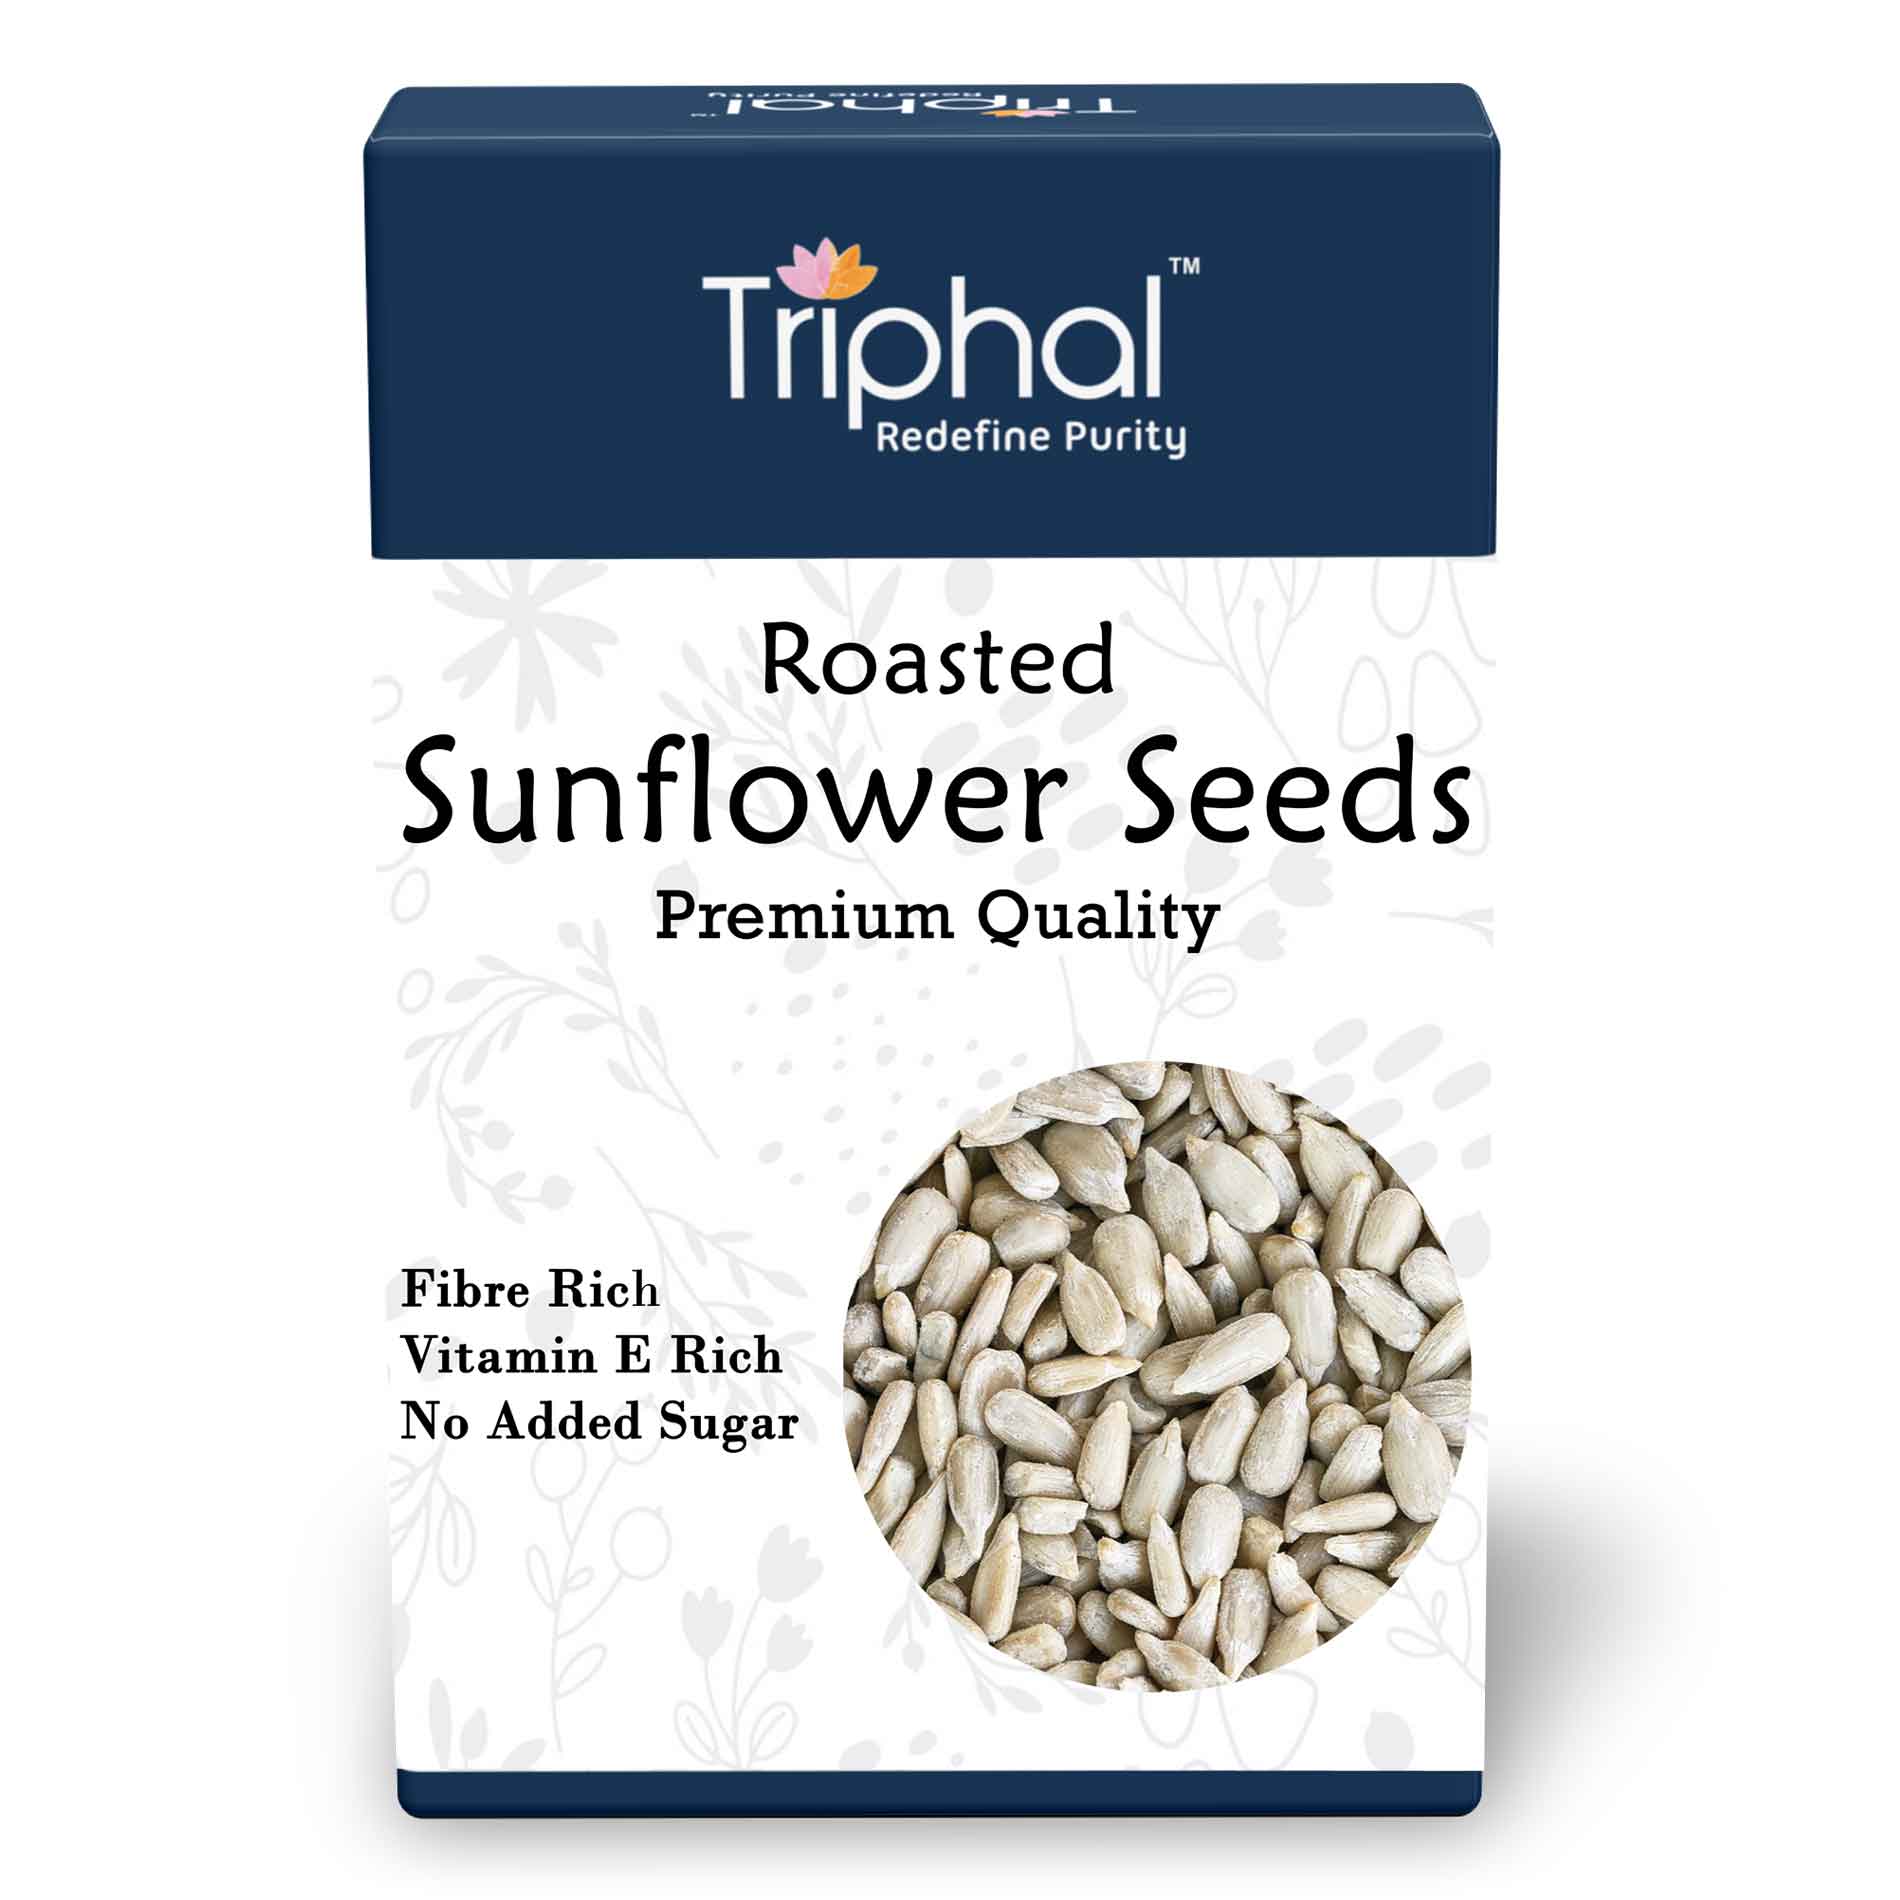 Deliciously Roasted Sunflower Seeds - A Tasty and Nutritious Snack for Any Occasion